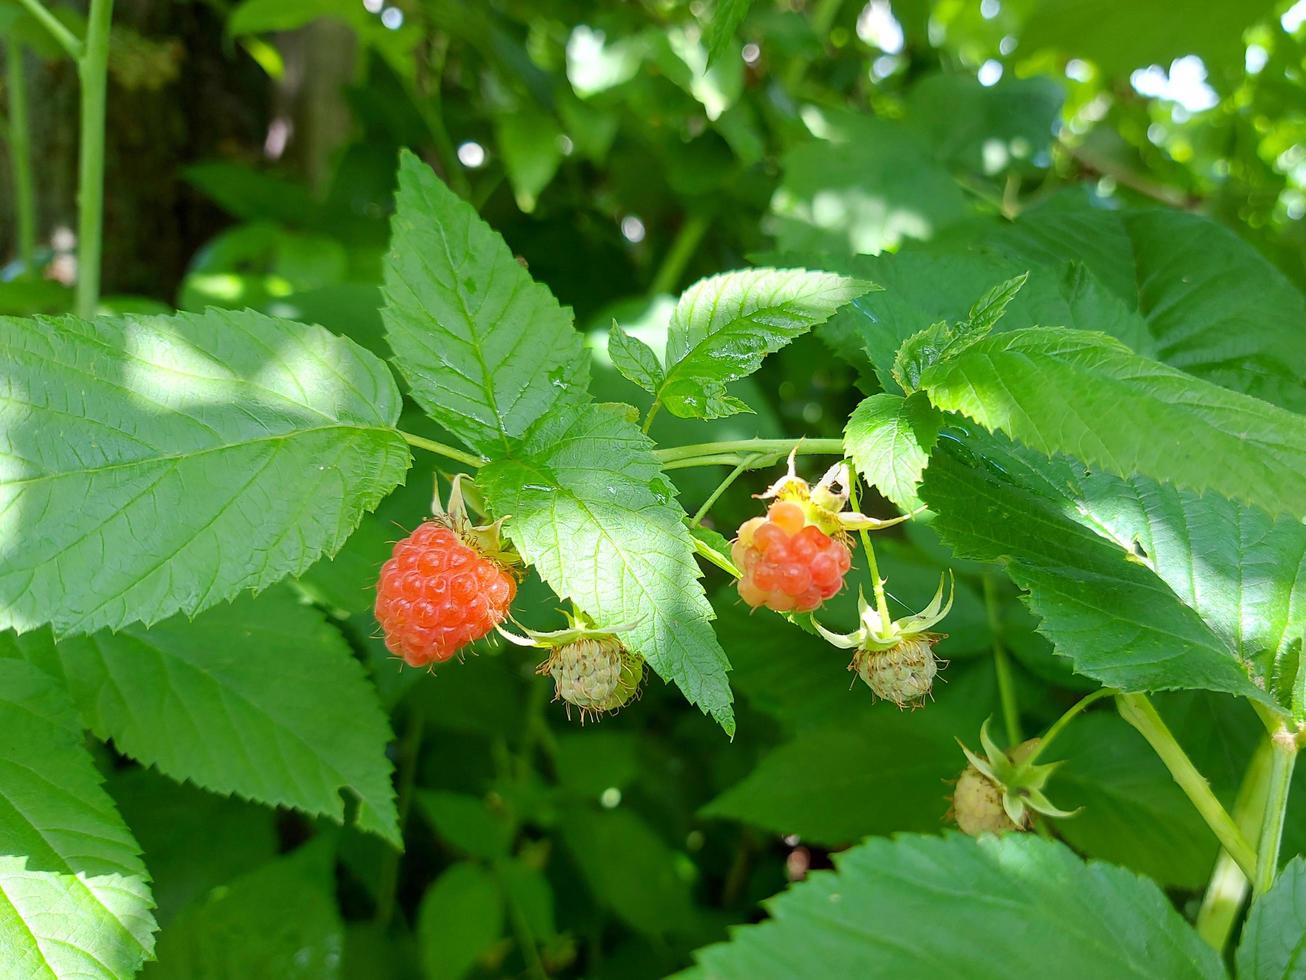 raspberries ripen on a twig in the garden. summer ripe berries. red and unripe fruits. growing gardening. harvest. photo